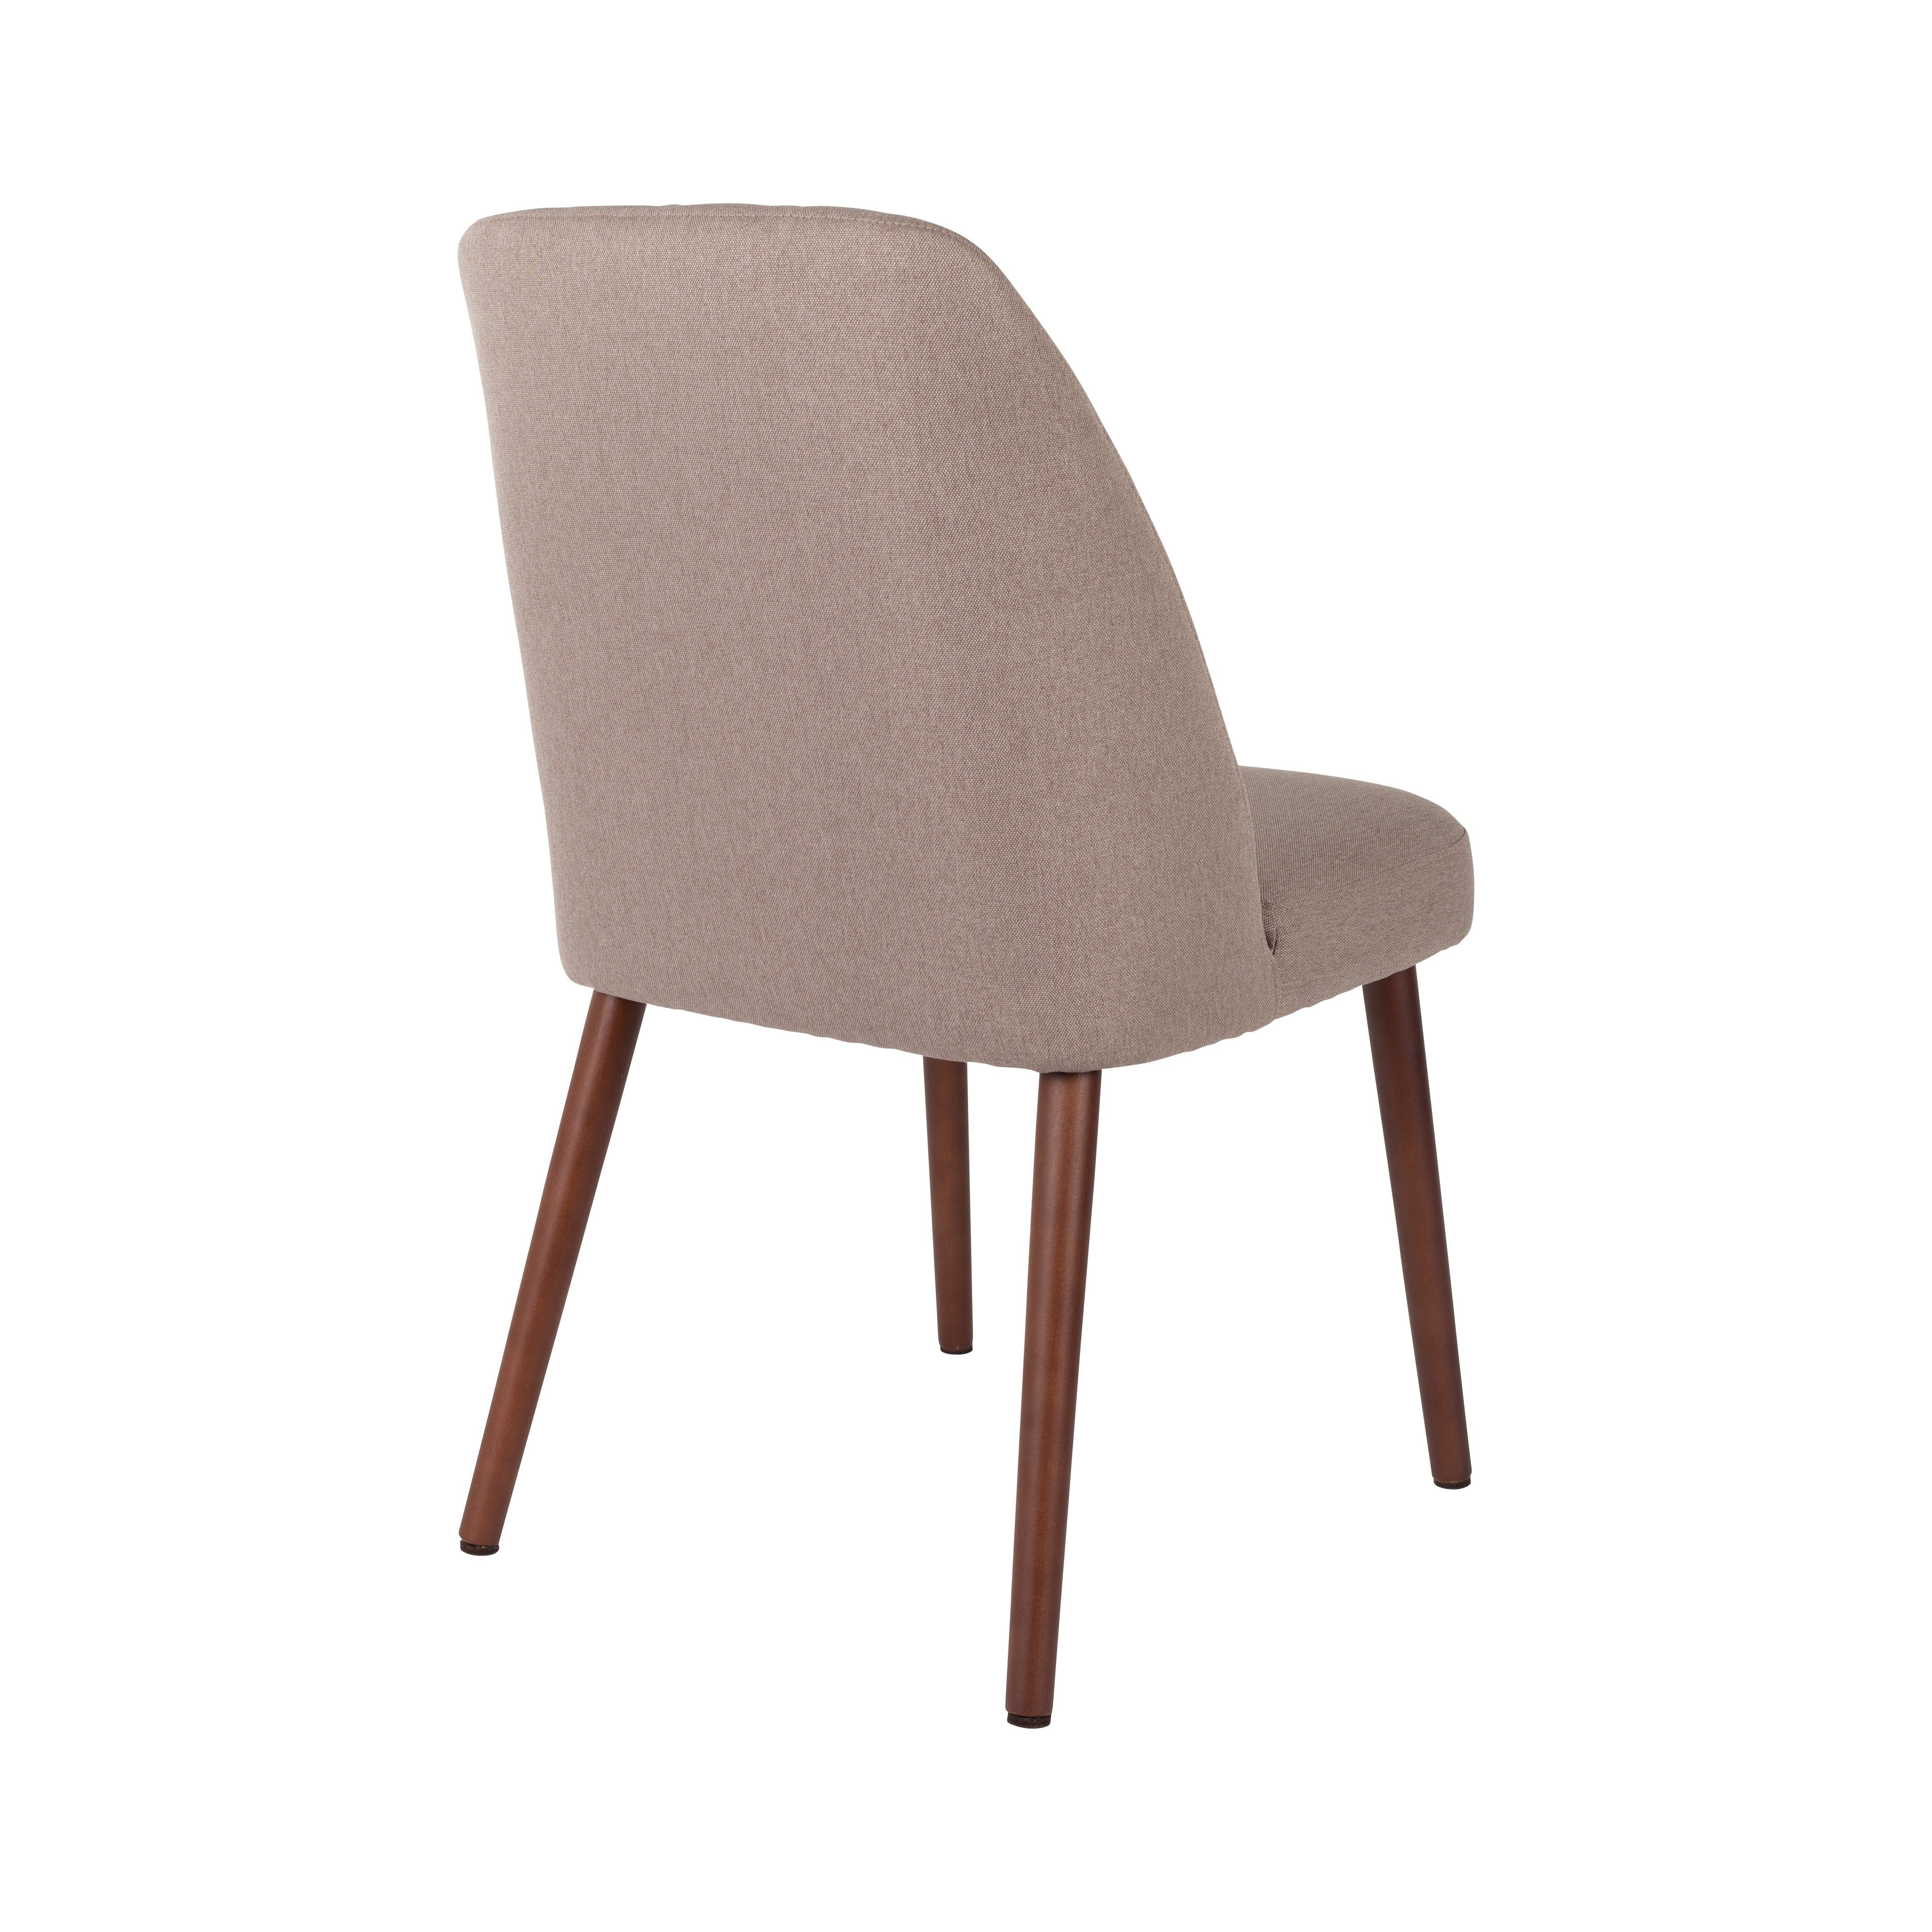 Chair conway beige | 2 pieces